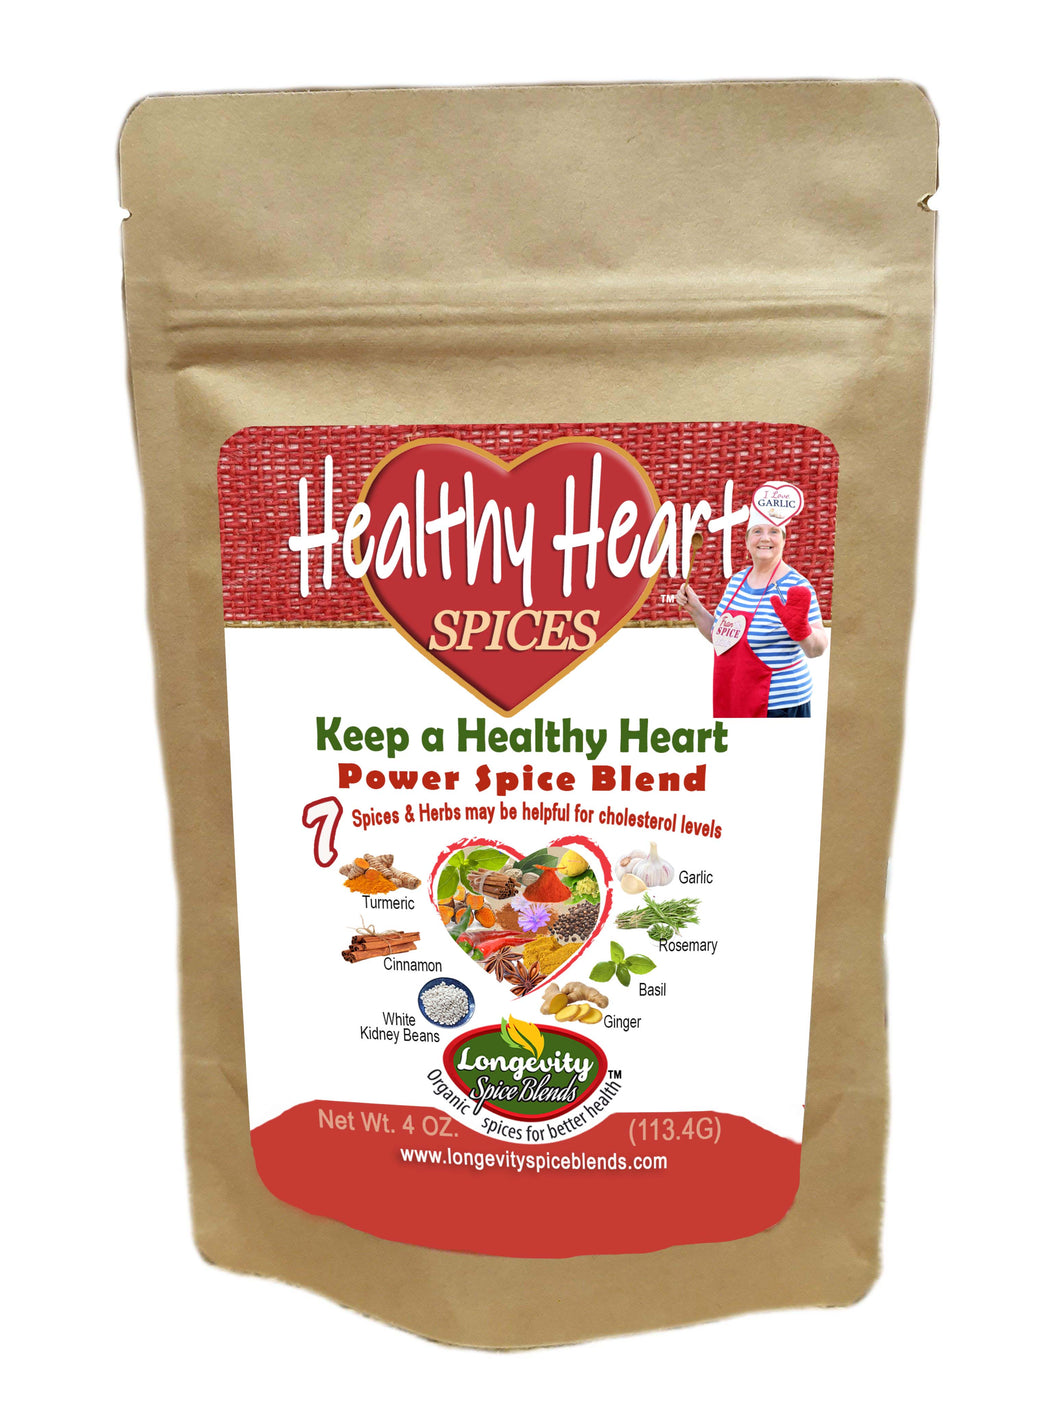 Heart Health-2 - Healthy Heart Spices - Boosting Heart Health with Spices & Herbs